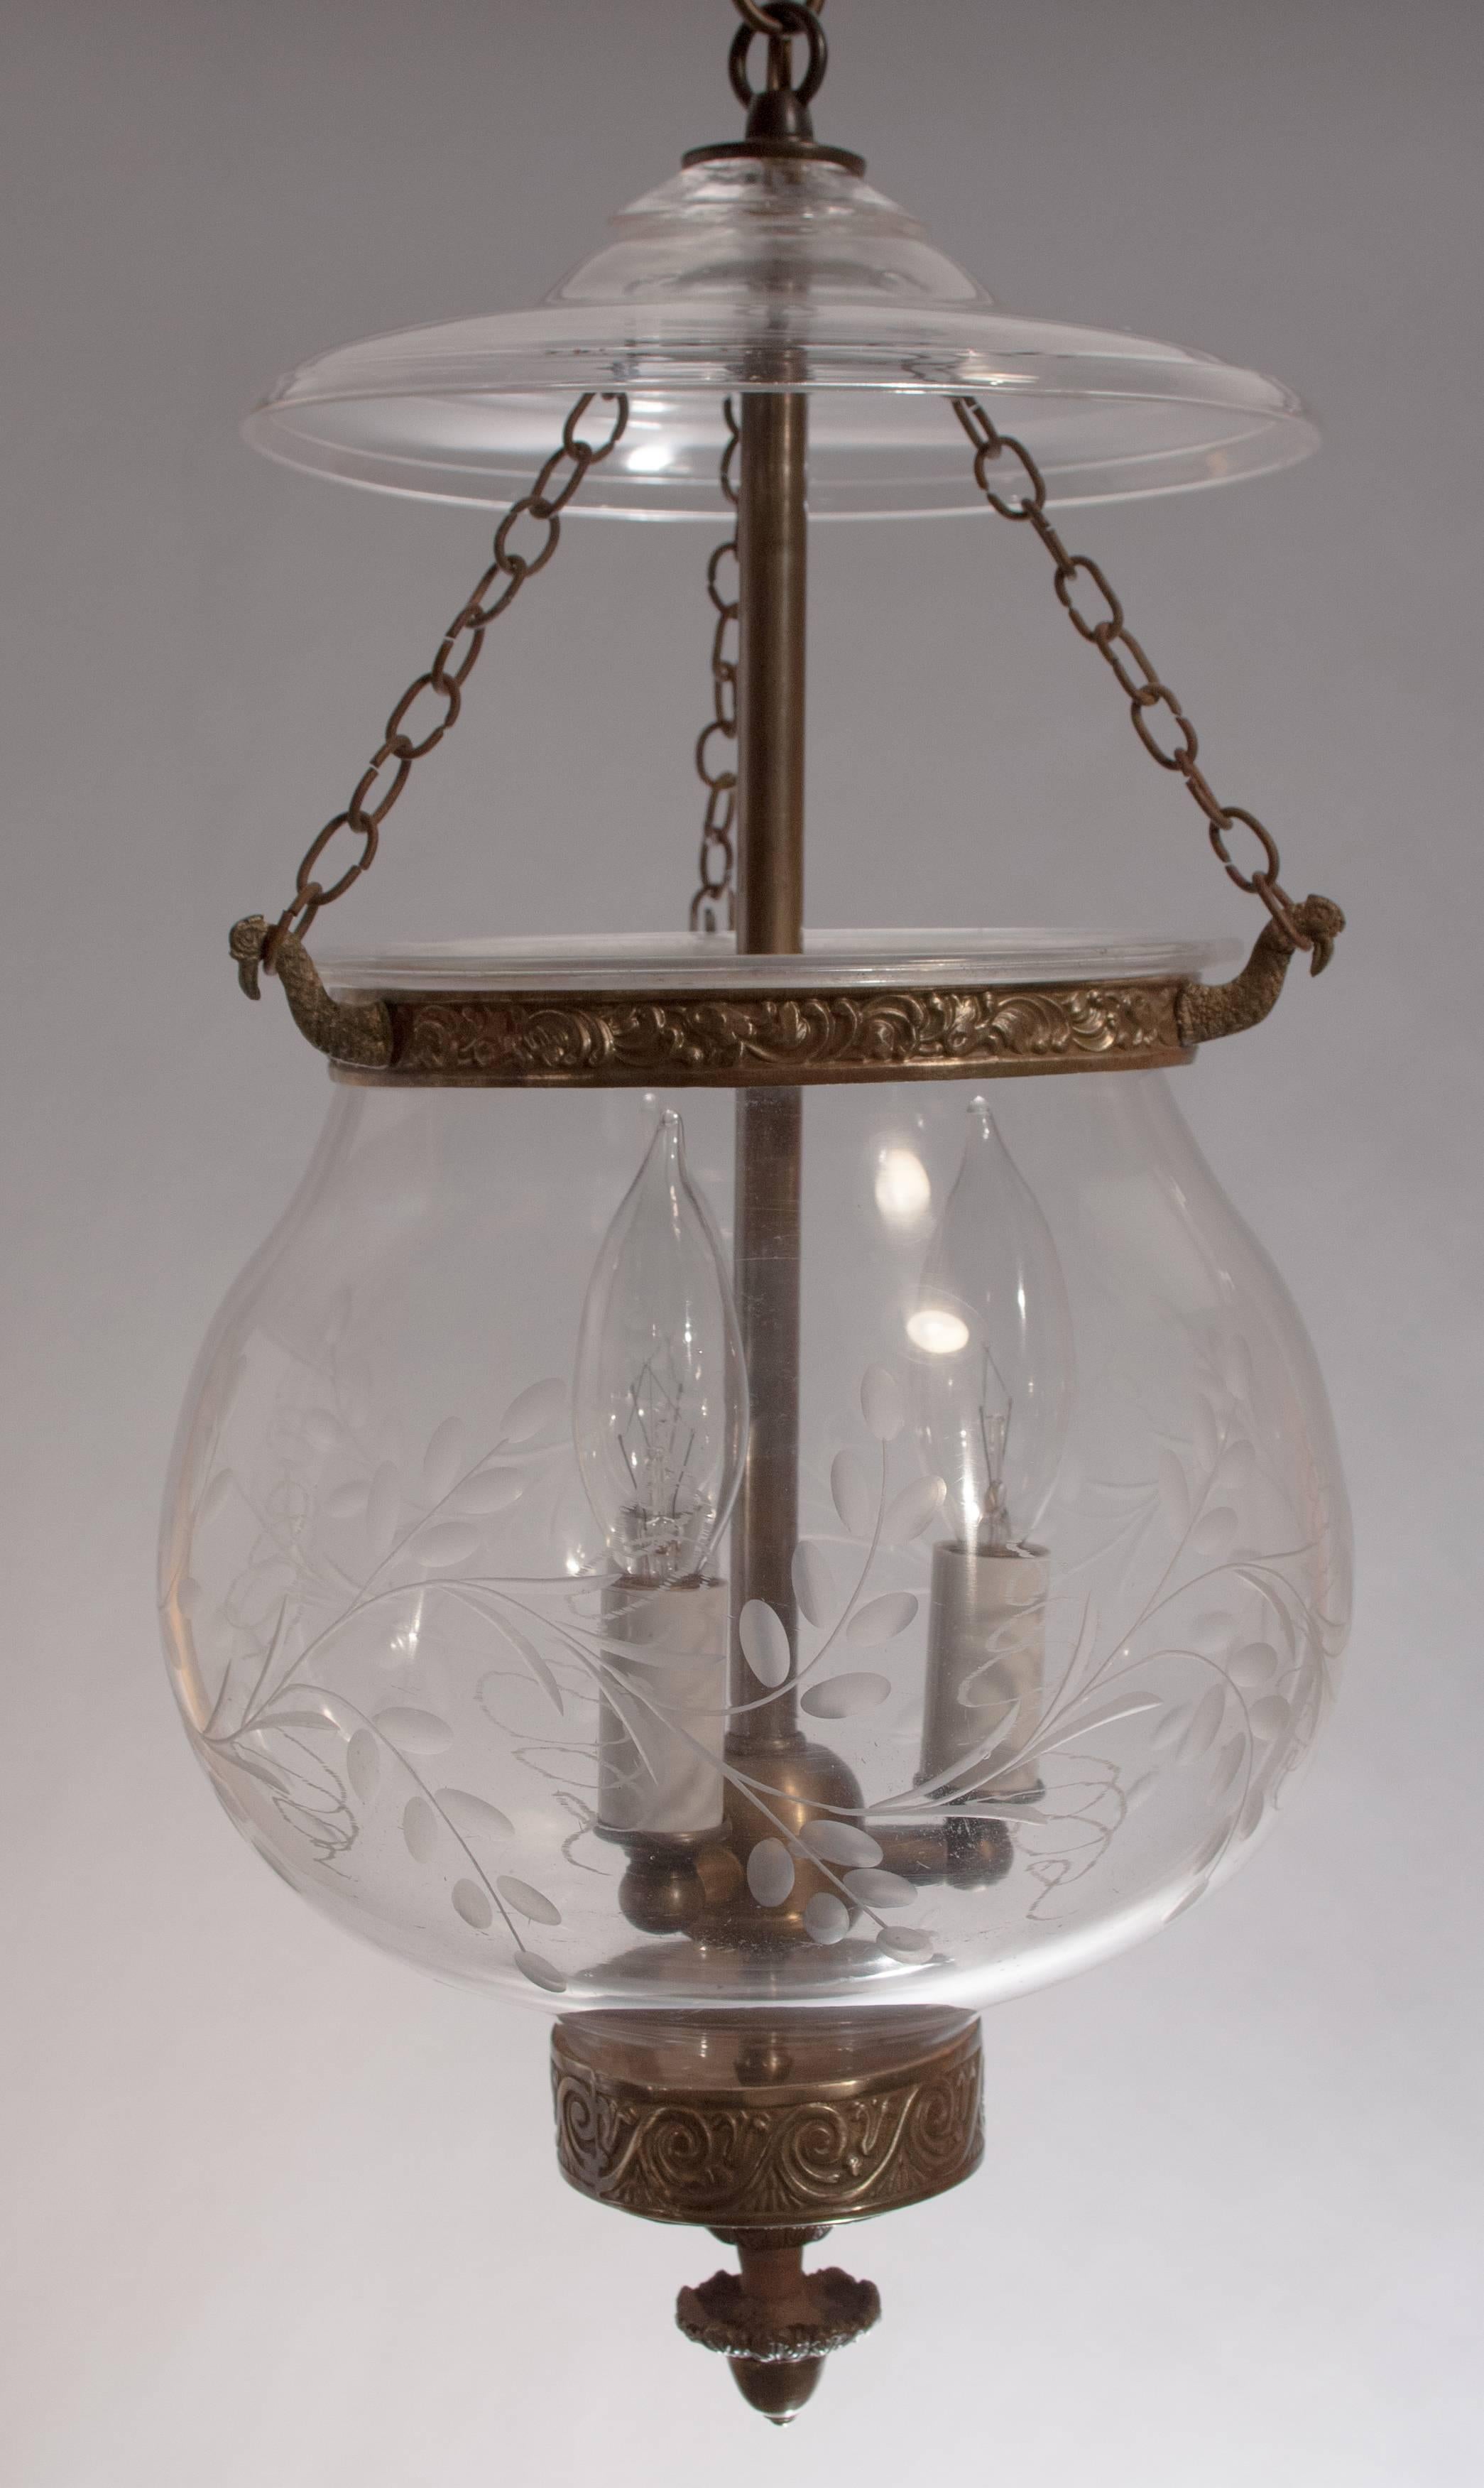 Handblown English globe bell jar lantern, circa 1850, with lovely form and finely etched vine design. This antique hall lantern has its original smoke bell, decorative brass candle holder and band. The pendant light has been newly electrified with a